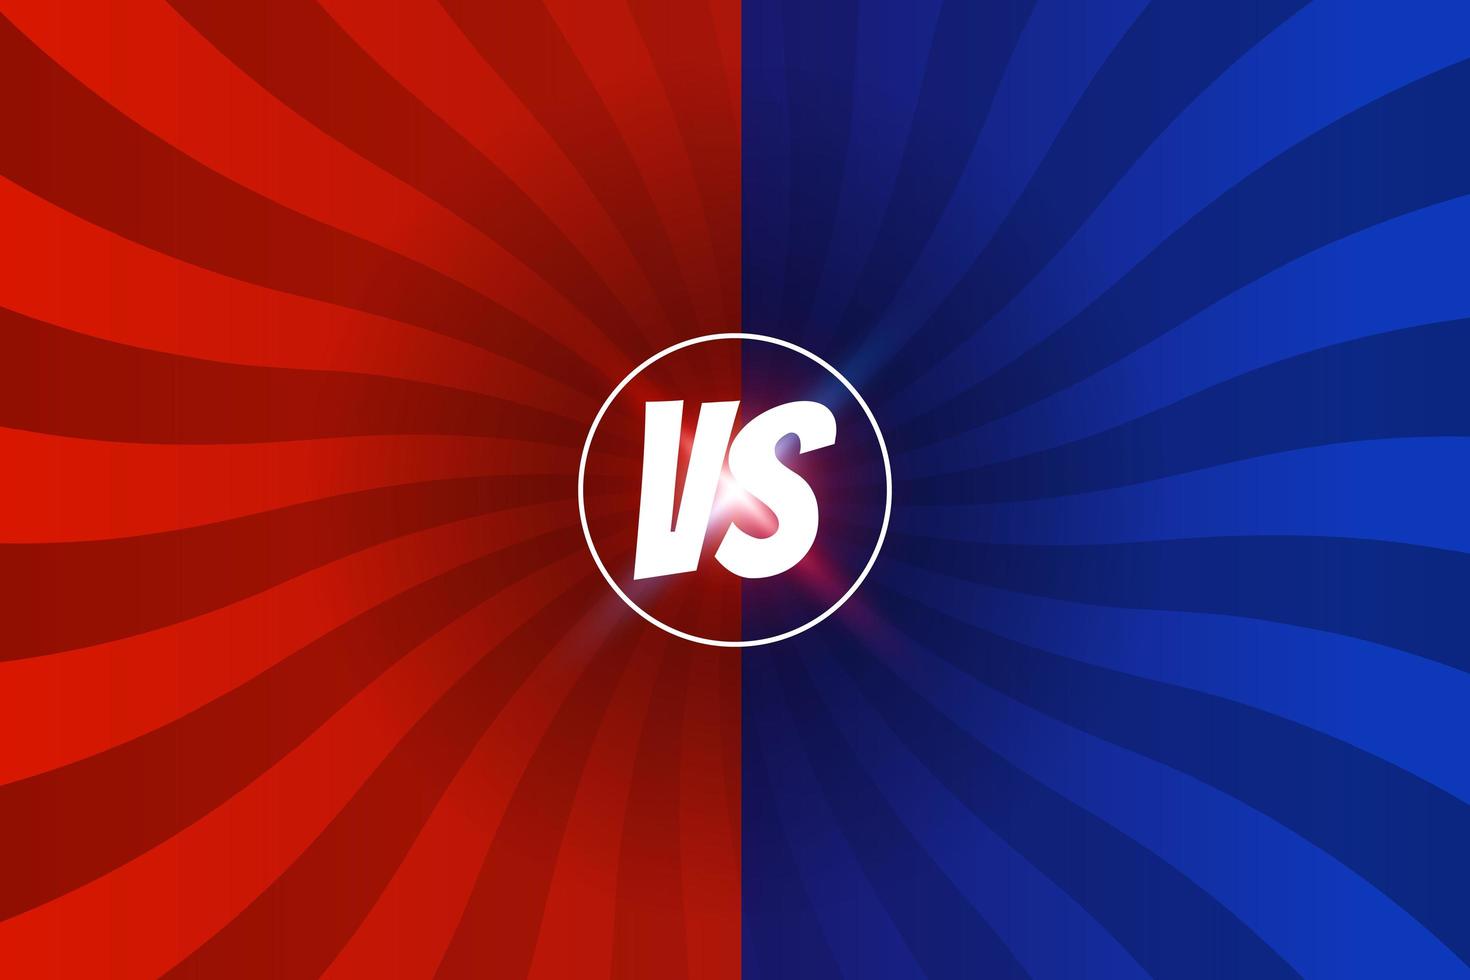 versus vs battle screen background red and yellow in comic style vector